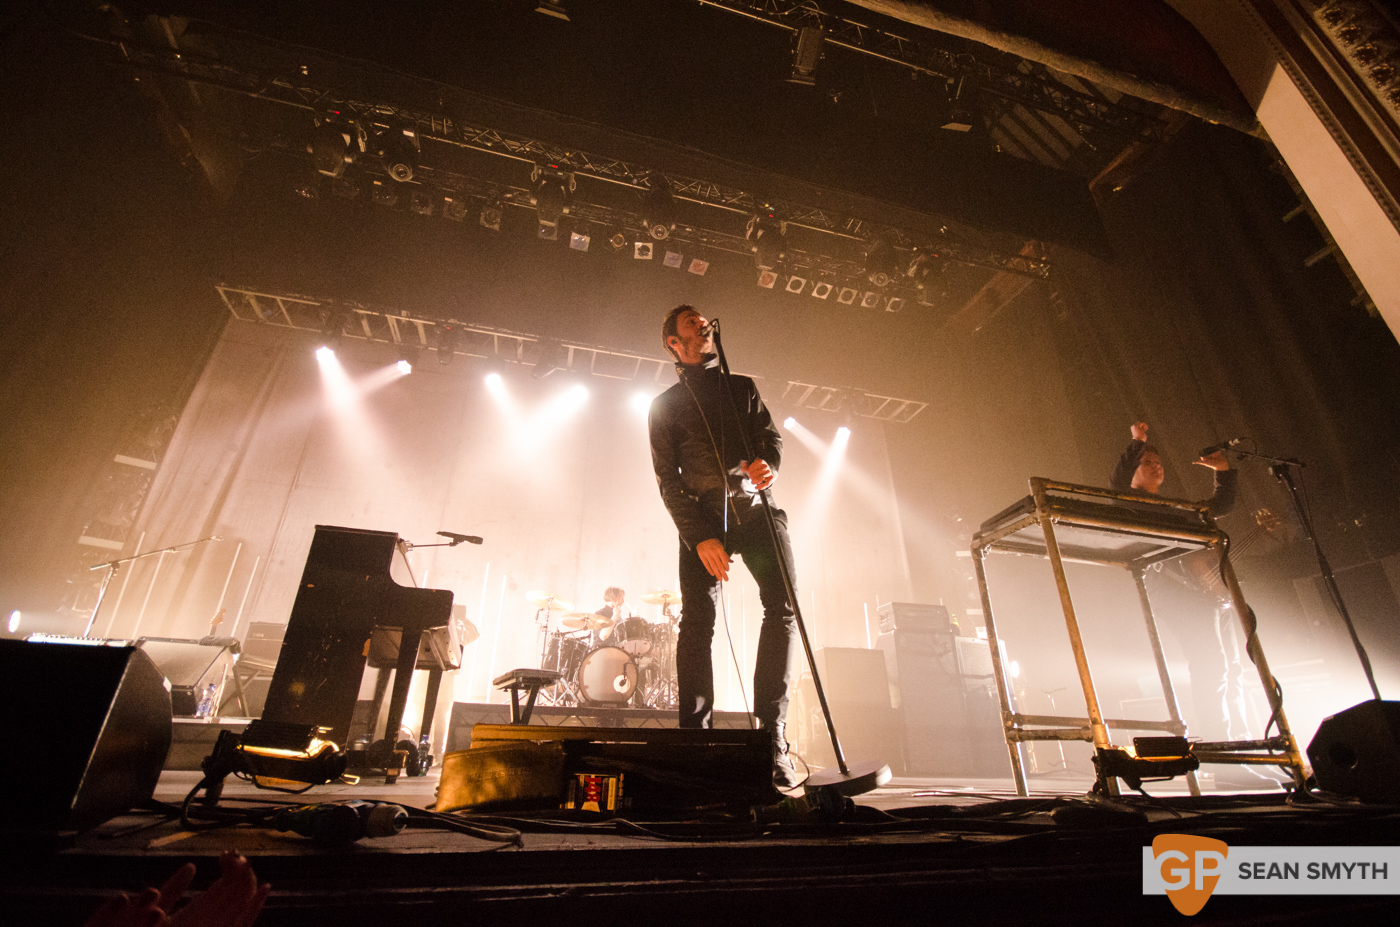 editors-at-the-olympia-theatre-by-sean-smyth-10-10-15-22-of-28_22100459691_o